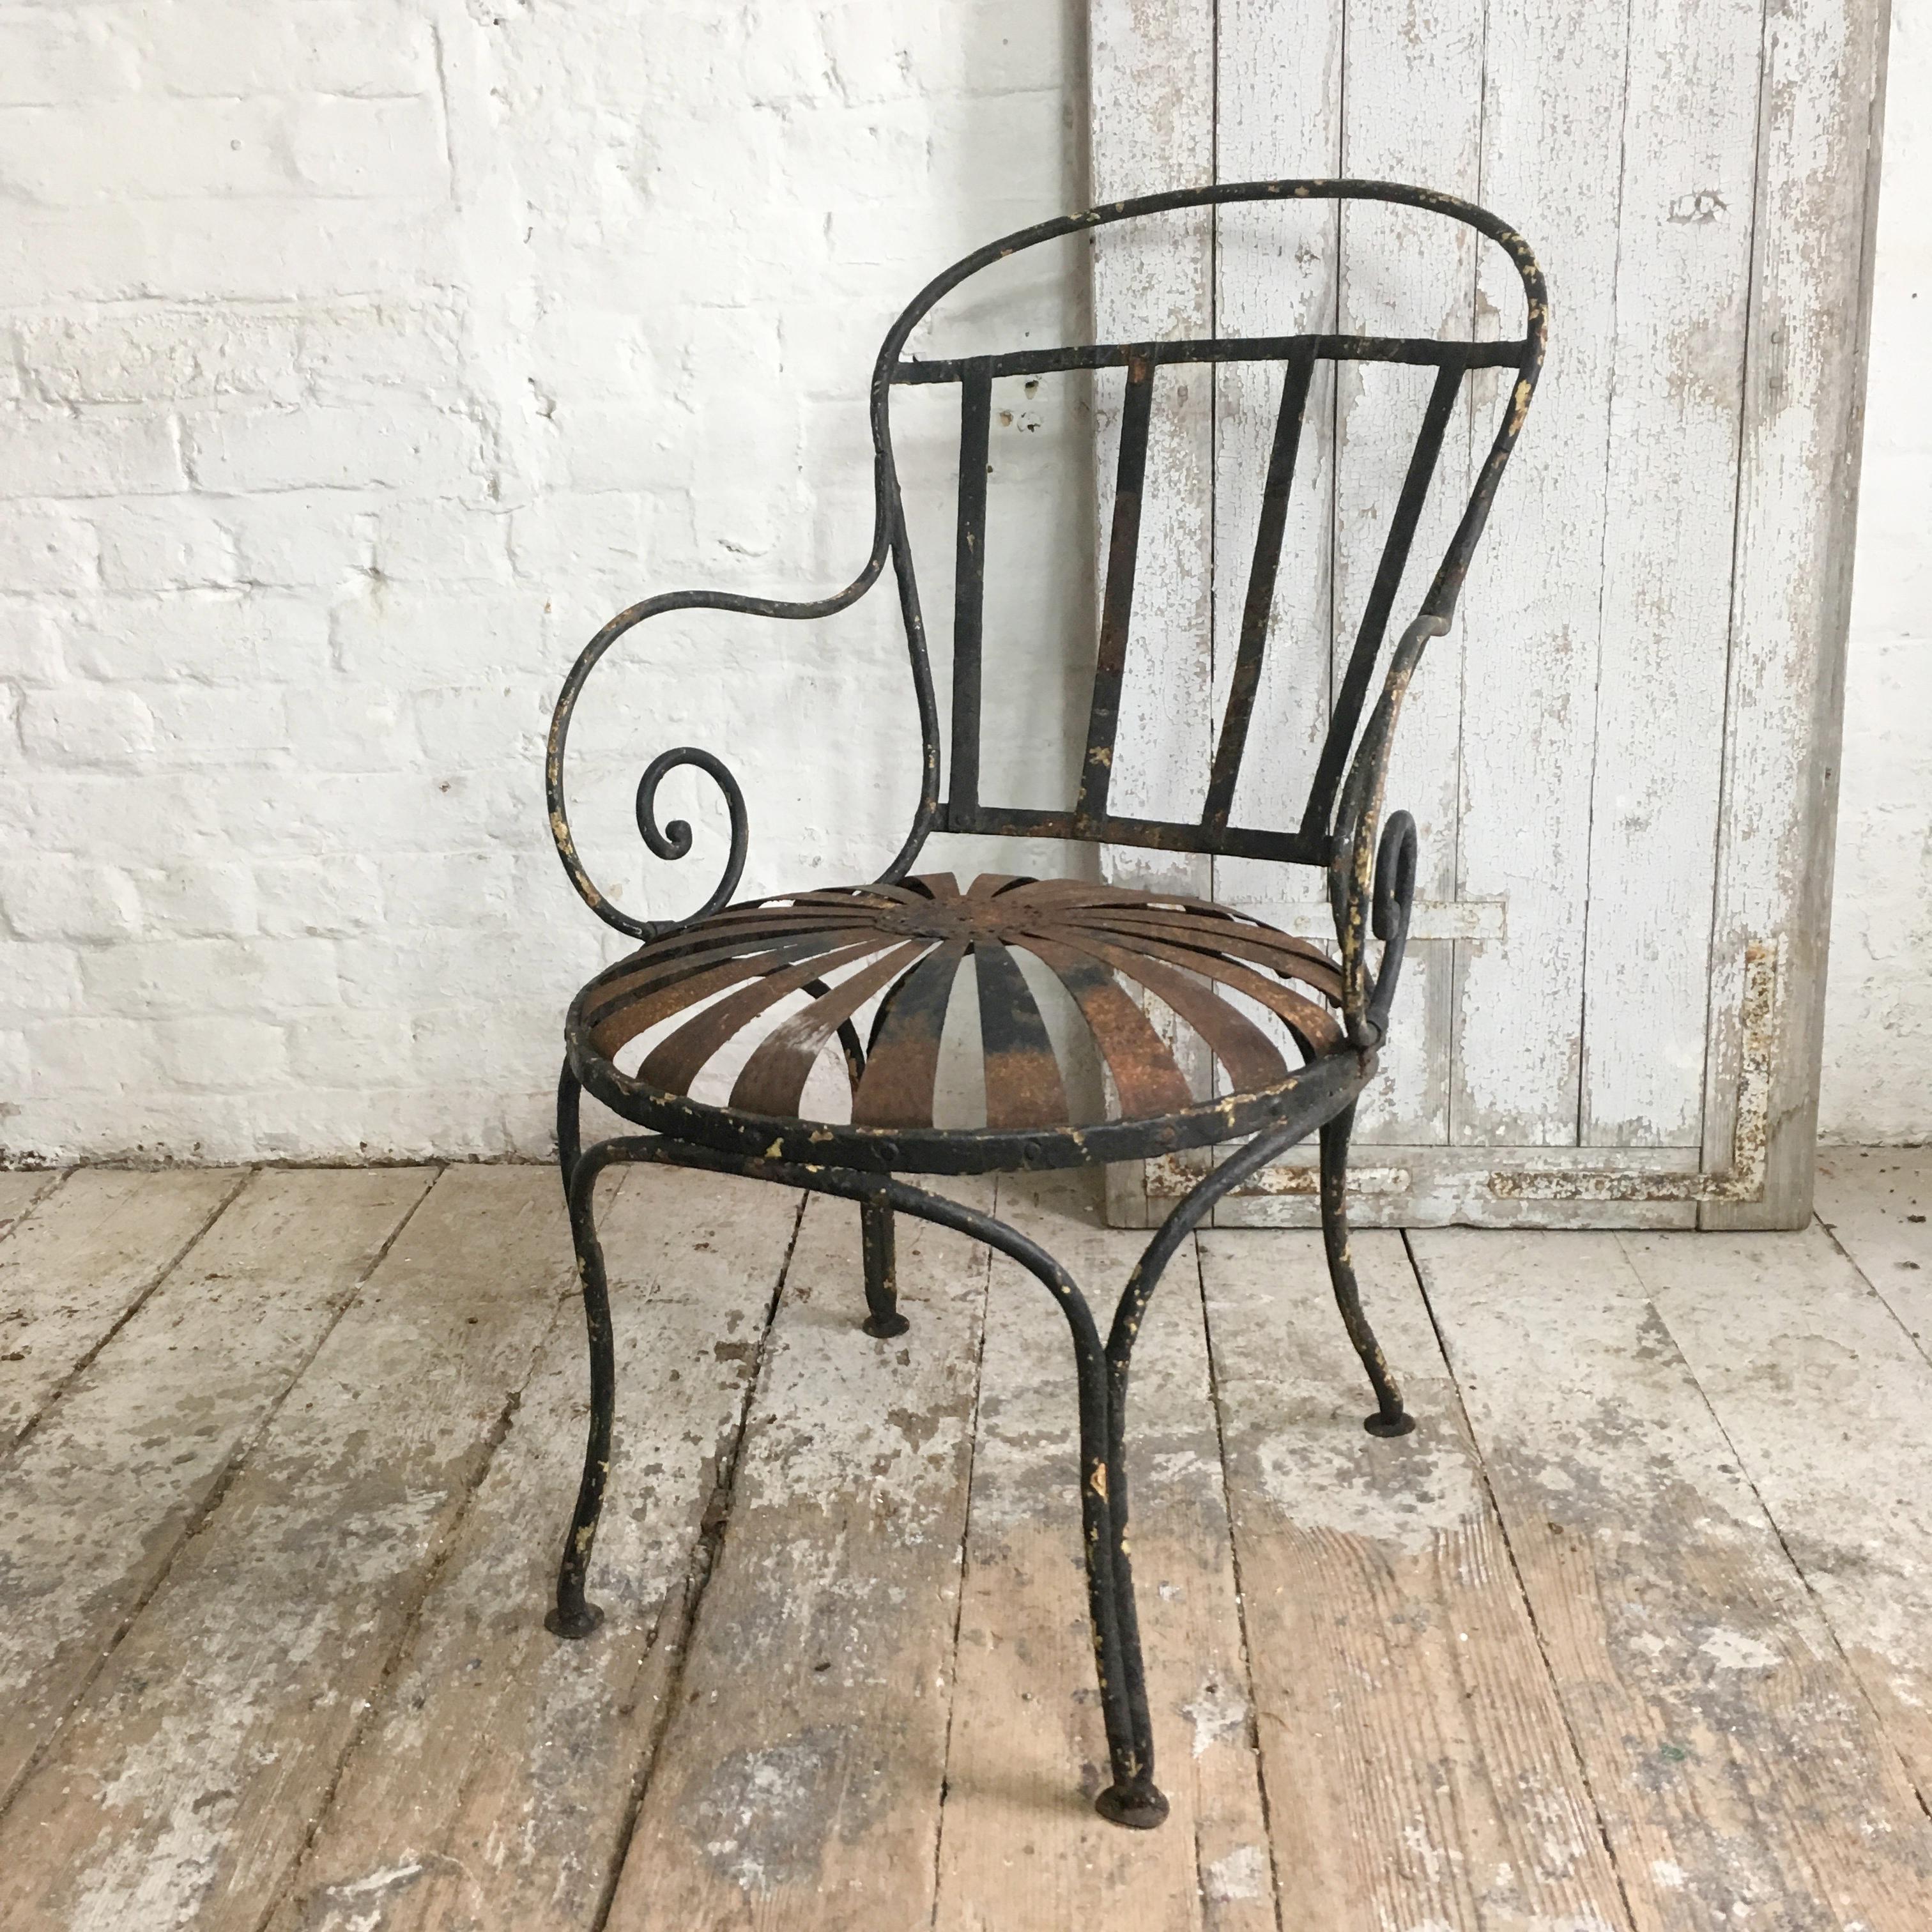 An early 20th century French iron sprung sunburst garden chair by Francois Carre. The chair is black with some areas of light rust and earlier underlying yellow tones of paint showing through, circa 1920s.
Measures: 83cm height, 54cm width, 69cm